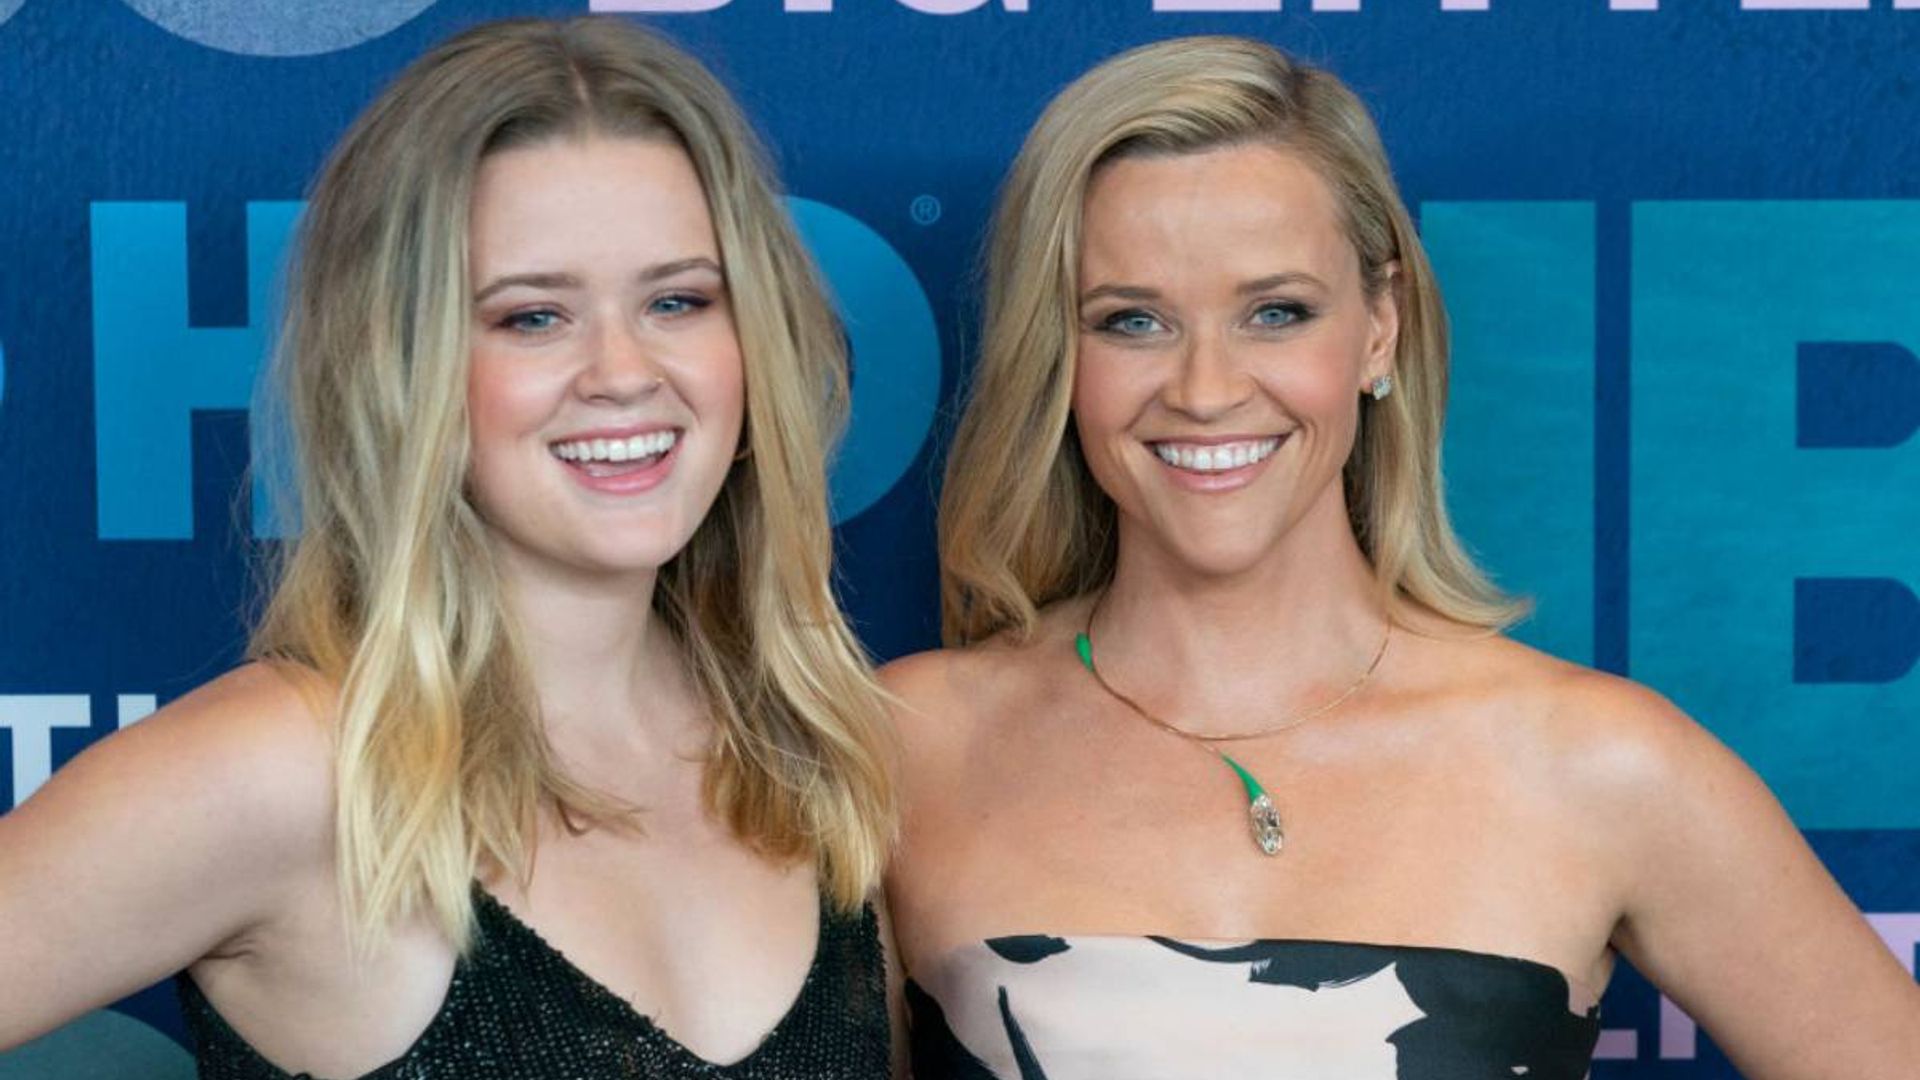 Reese Witherspoon's daughter Ava makes statement about gender with powerful message